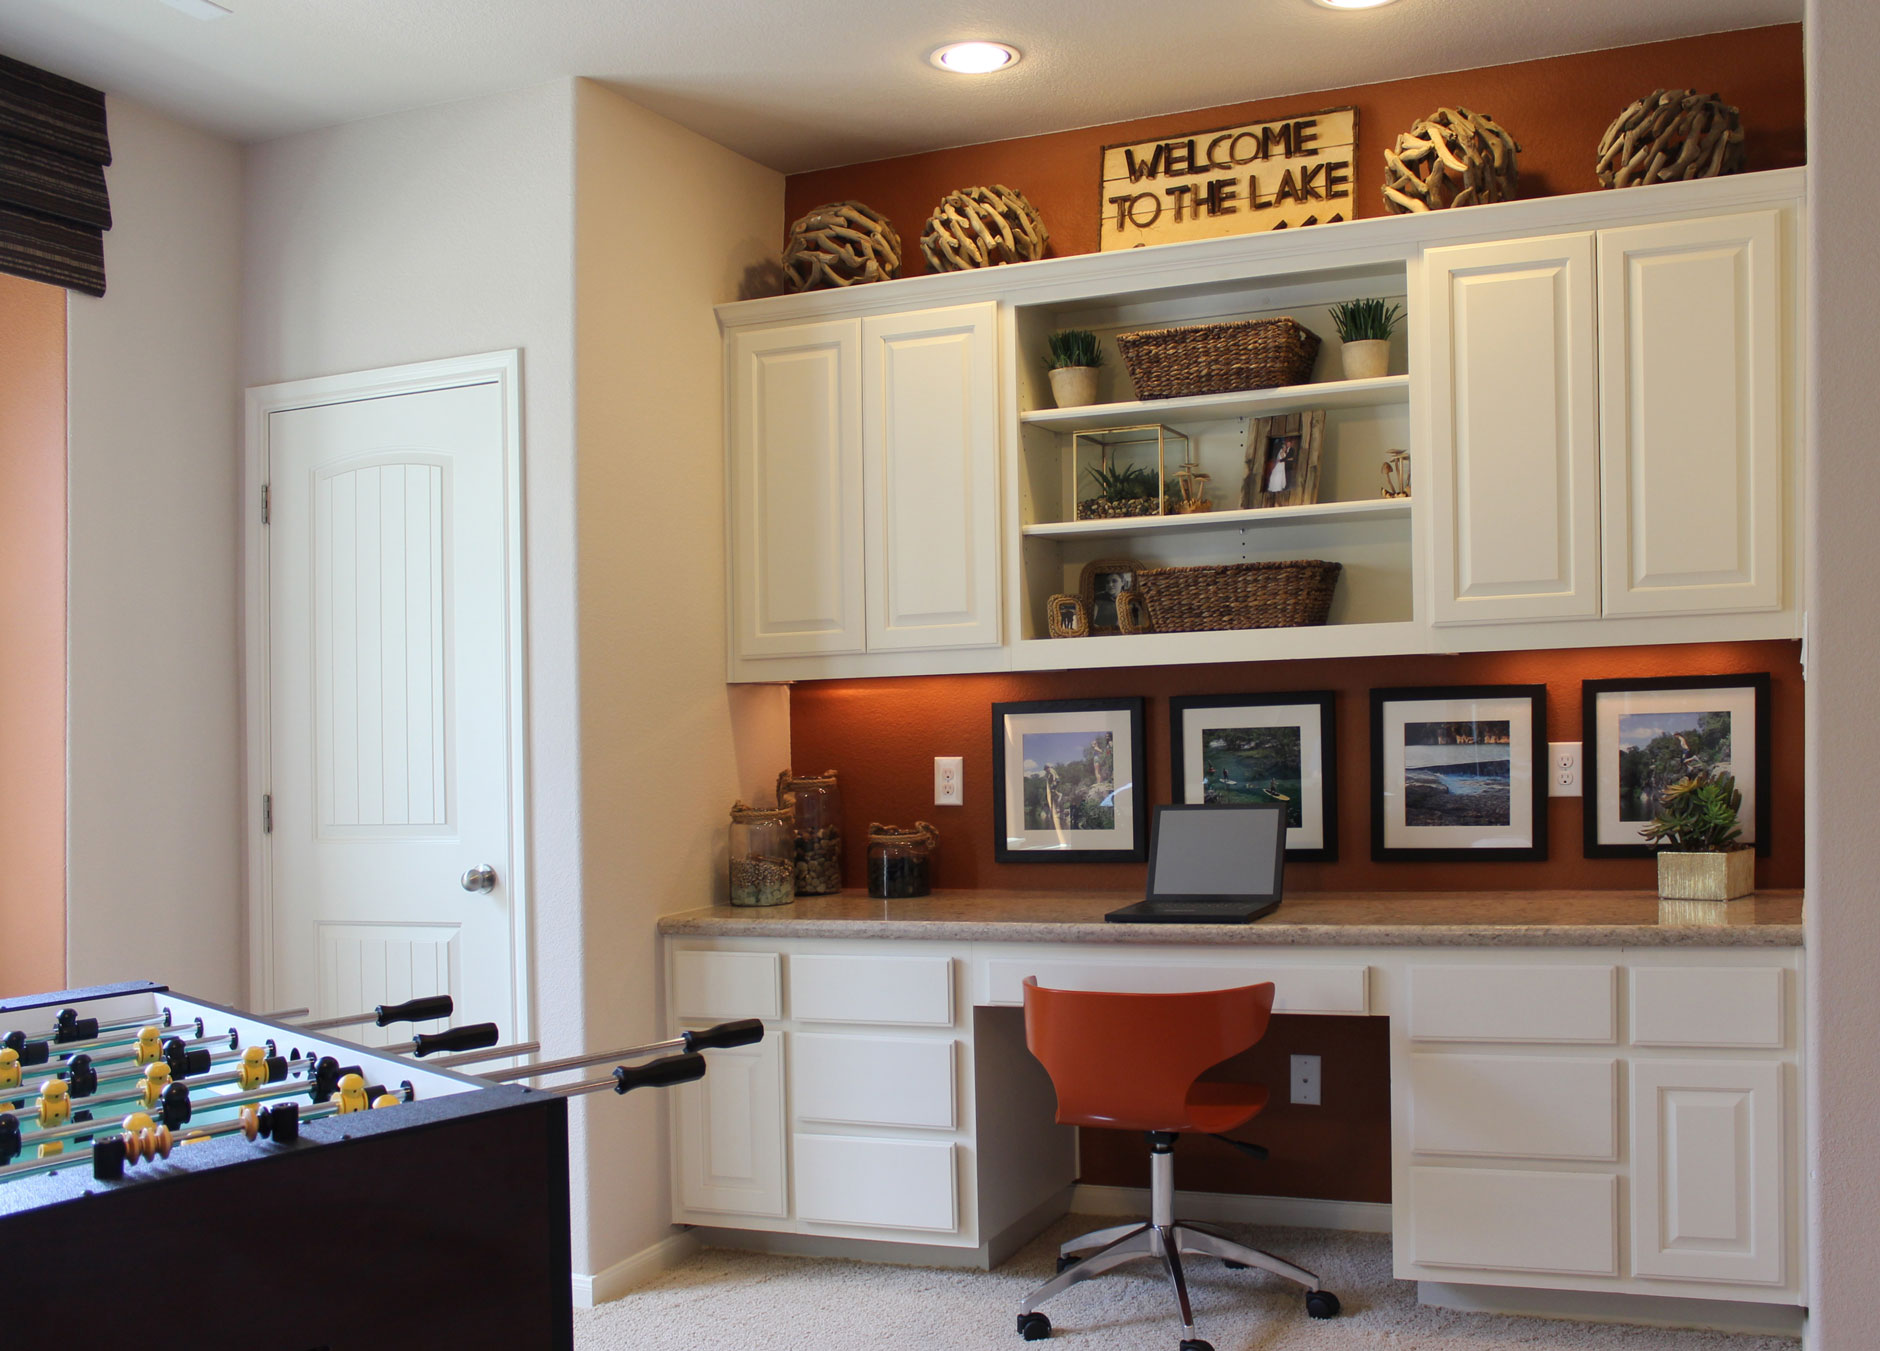 Game room workstation with raised panel cabinet doors by TaylorCraft Cabinet Door Company in paint grade hardwood